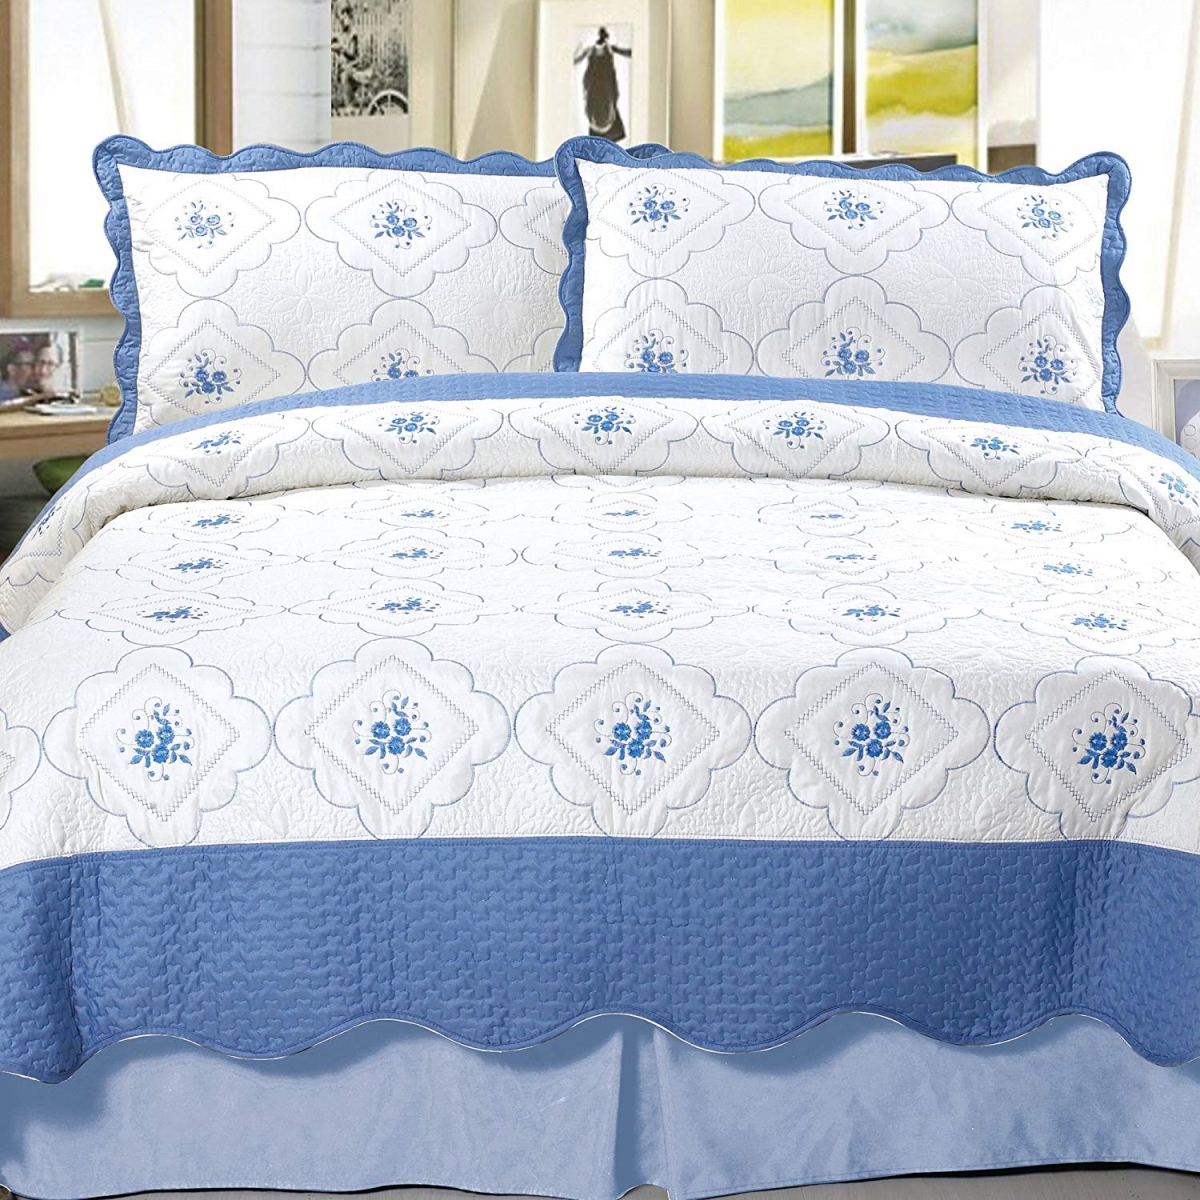 66a-20048 Brianna Embroidered 2 Piece Quilt Set, Twin Size